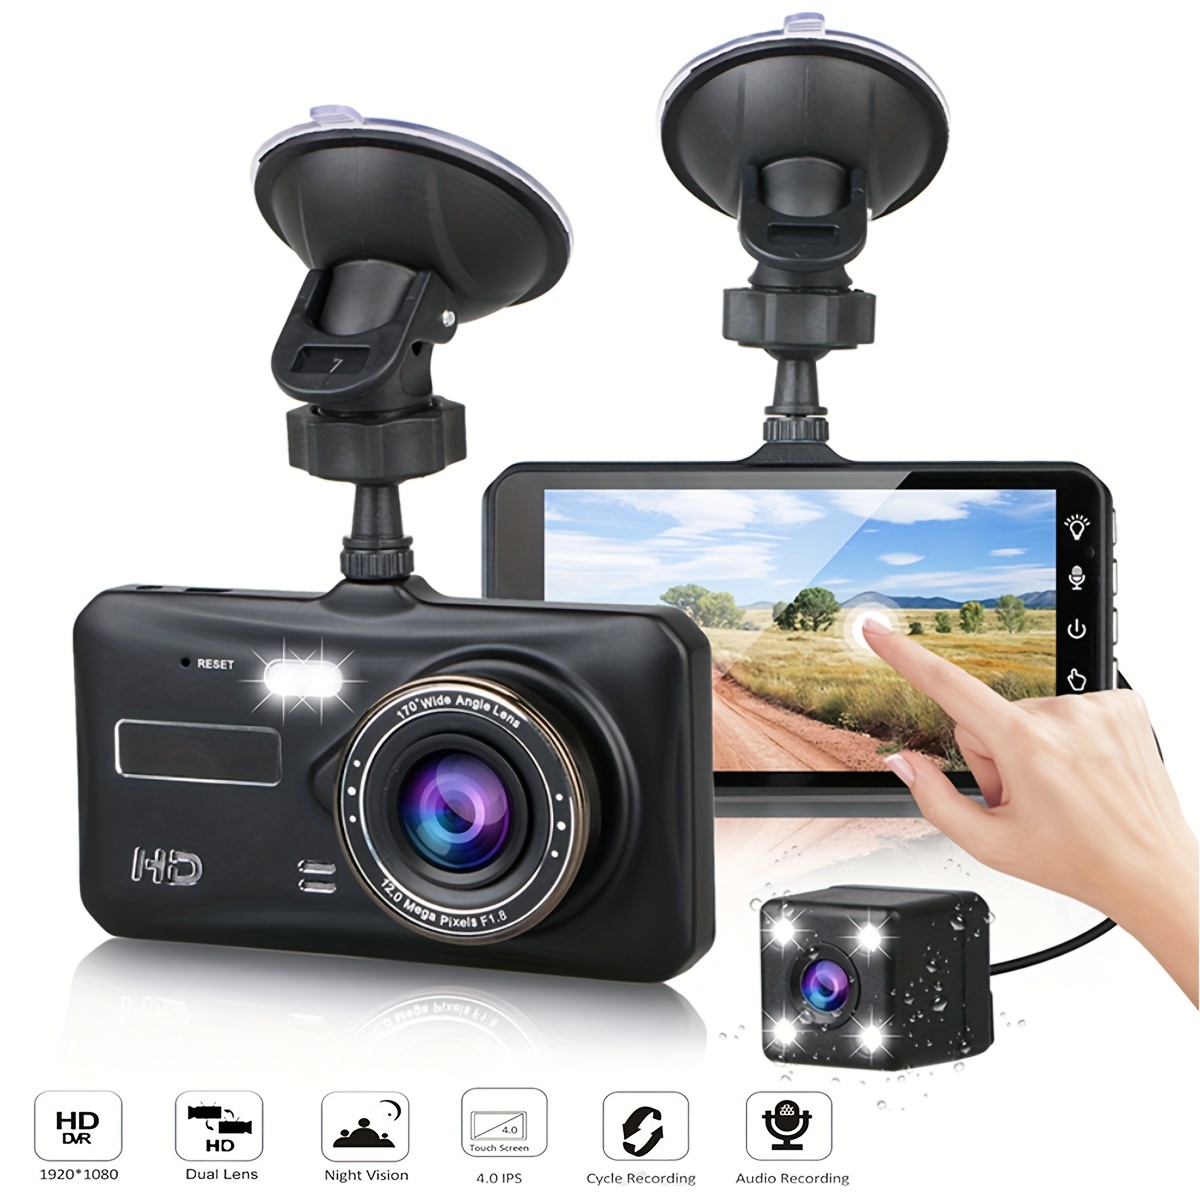 Dash Cam for Cars, 1080P Full HD DVR Car Driving Recorder 3.0 Inch